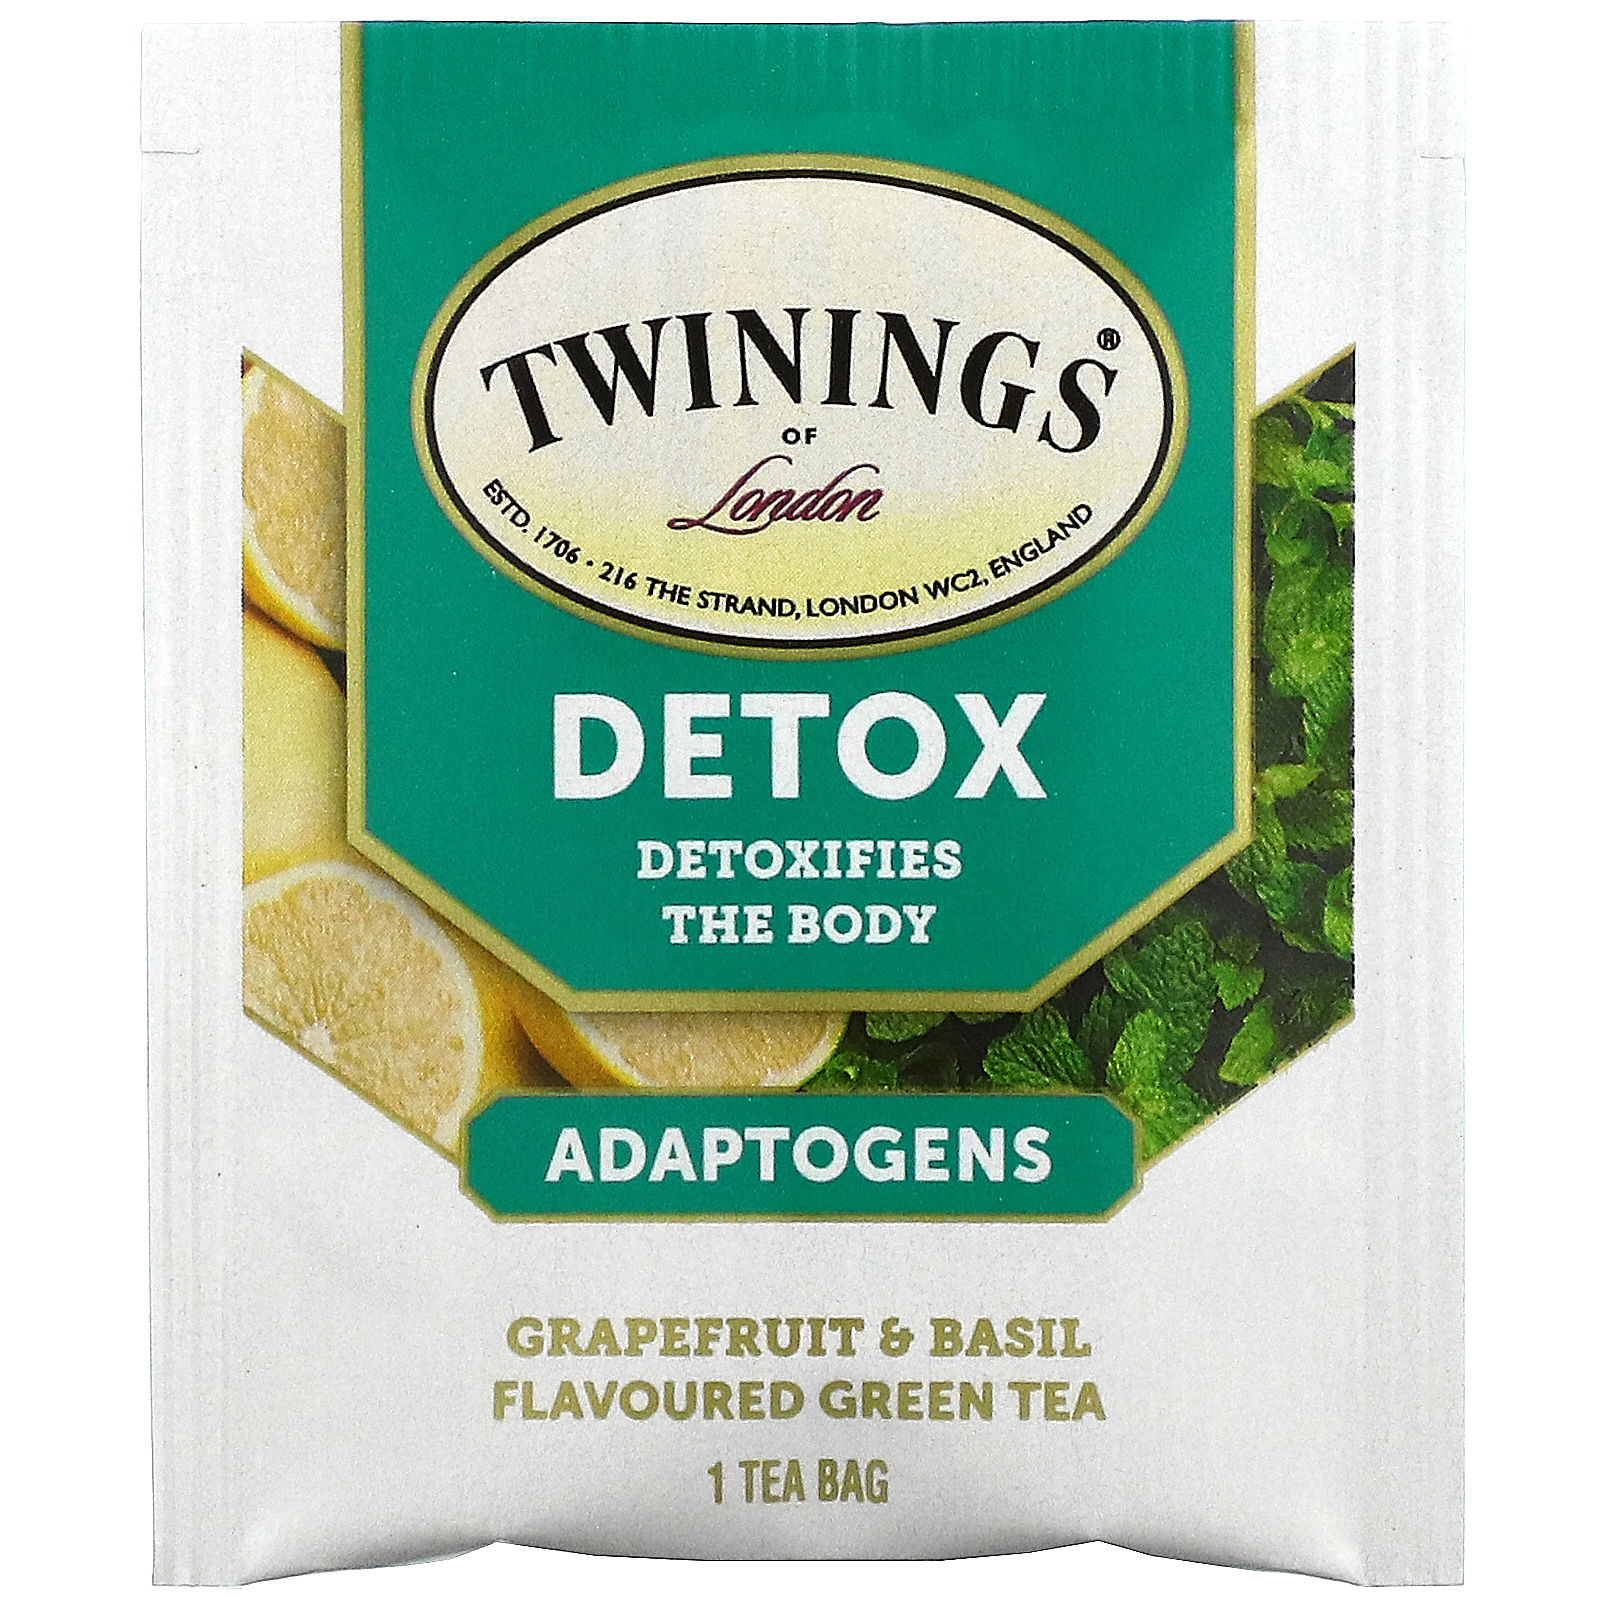 Twinings detox tea - Frequently Asked Customer Queries About